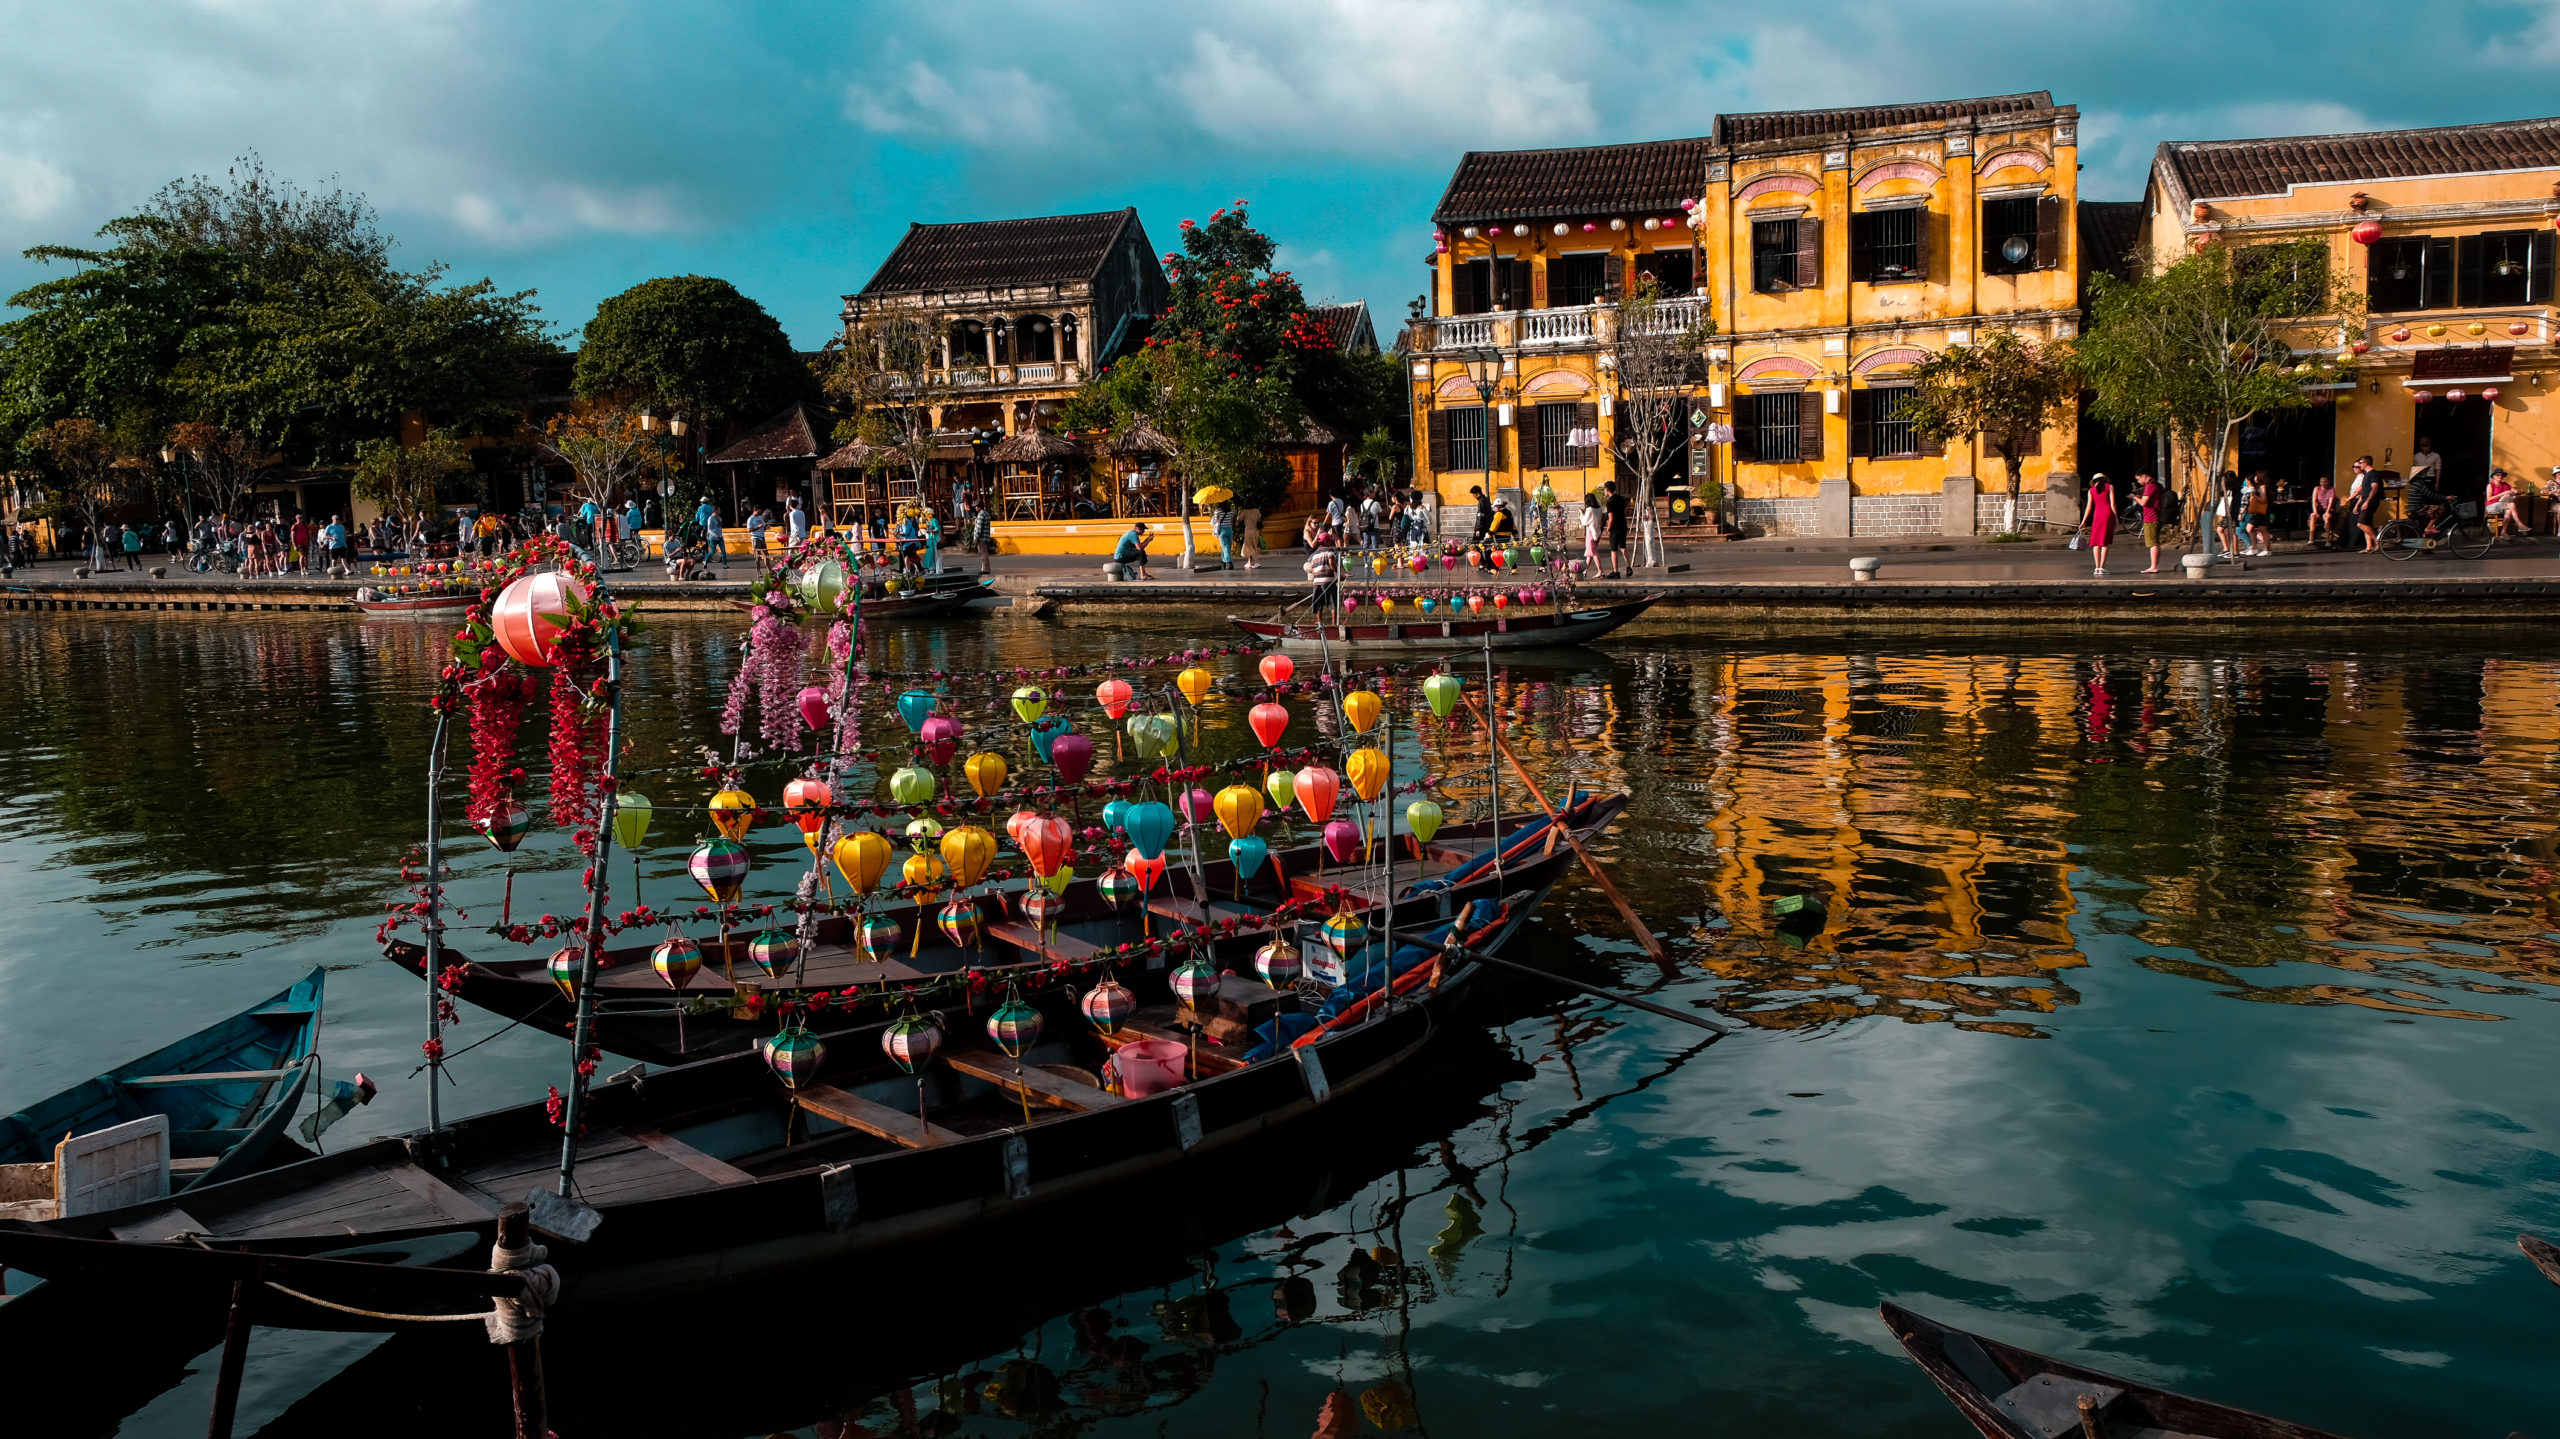 A boat with lanterns sits facing a yellow house in Hoi An